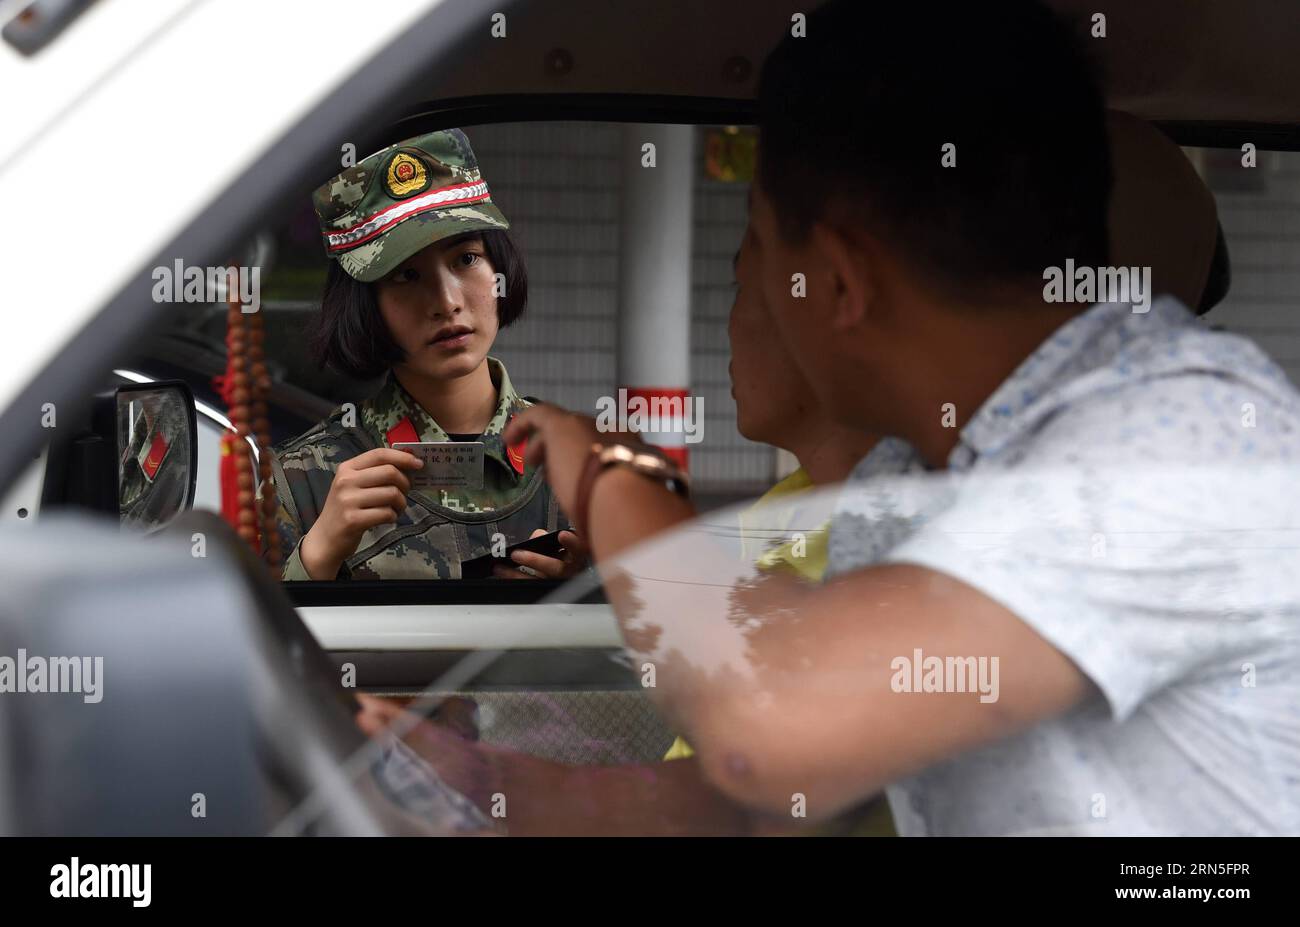 DEHONG, June 24, 2015 -- Zhang Liu checks the information of a driver at the border checkpoint of Mukang in Dehong Dai-Jingpo Autonomous Prefecture, southwest China s Yunnan Province, June 24, 2015. Born in 1995, Zhang Liu became an anti-drug soldier in border checkpoint of Mukang in 2013. Grown up in an affluent family in central China s Hunan Province, Zhang said that being a soldier had always been her dream, which drove her to join the army after graduating from high school. Being a front line anti-drug force, the border checkpoint of Mukang has captured about 100 kilograms of drugs since Stock Photo